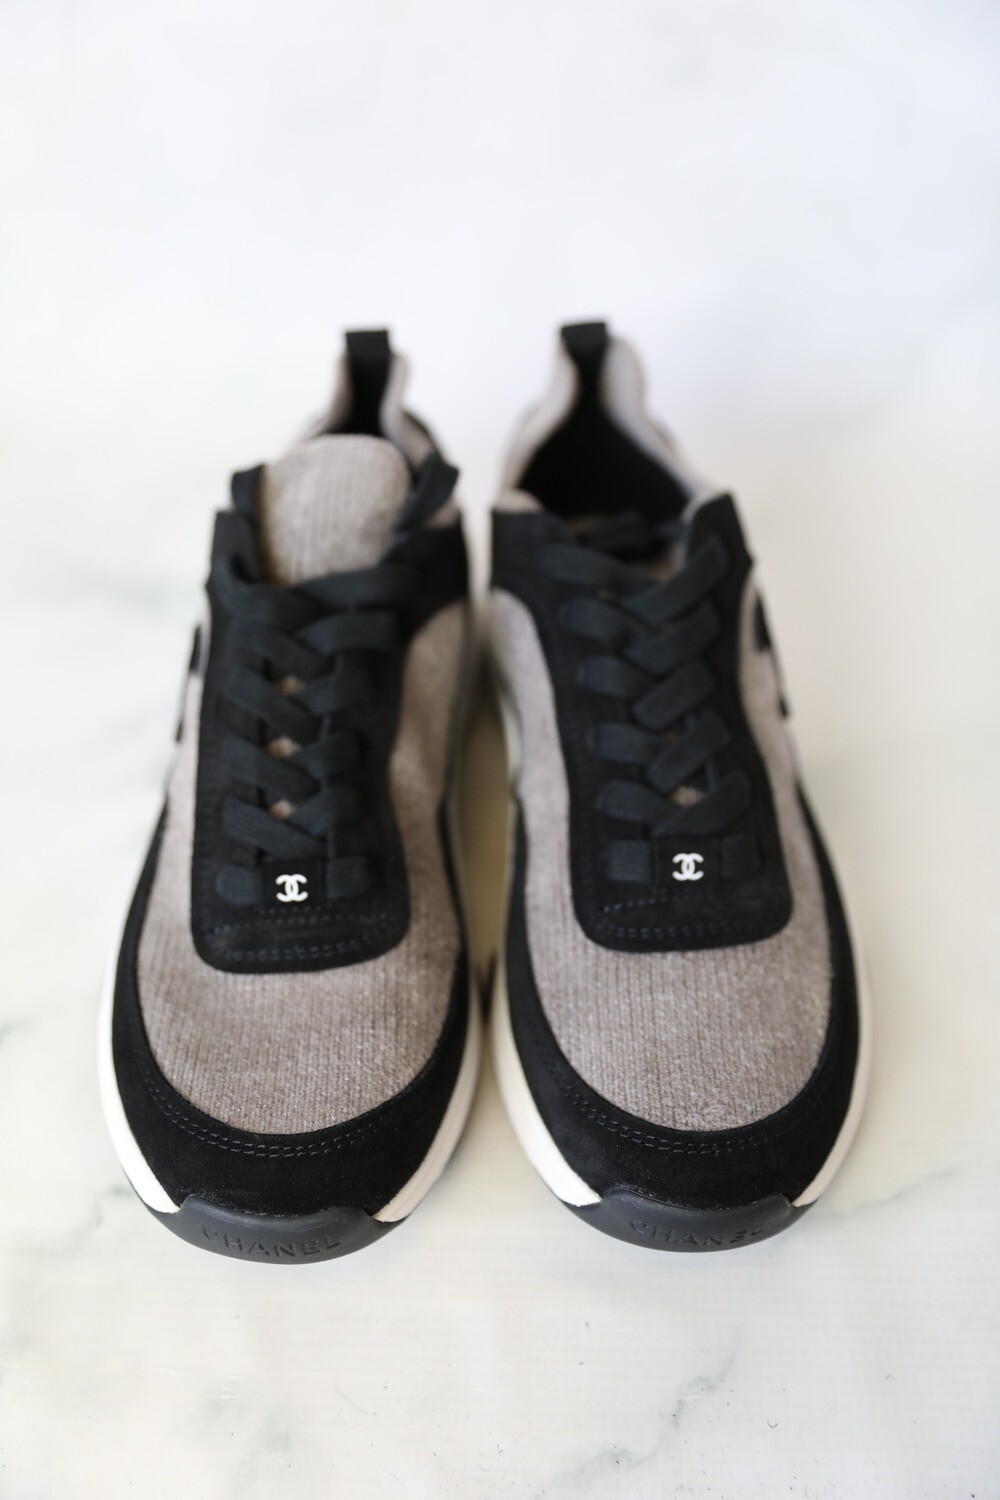 Chanel Black Leather Fabric and Suede CC Lace Up Sneakers Size 385 Chanel   TLC